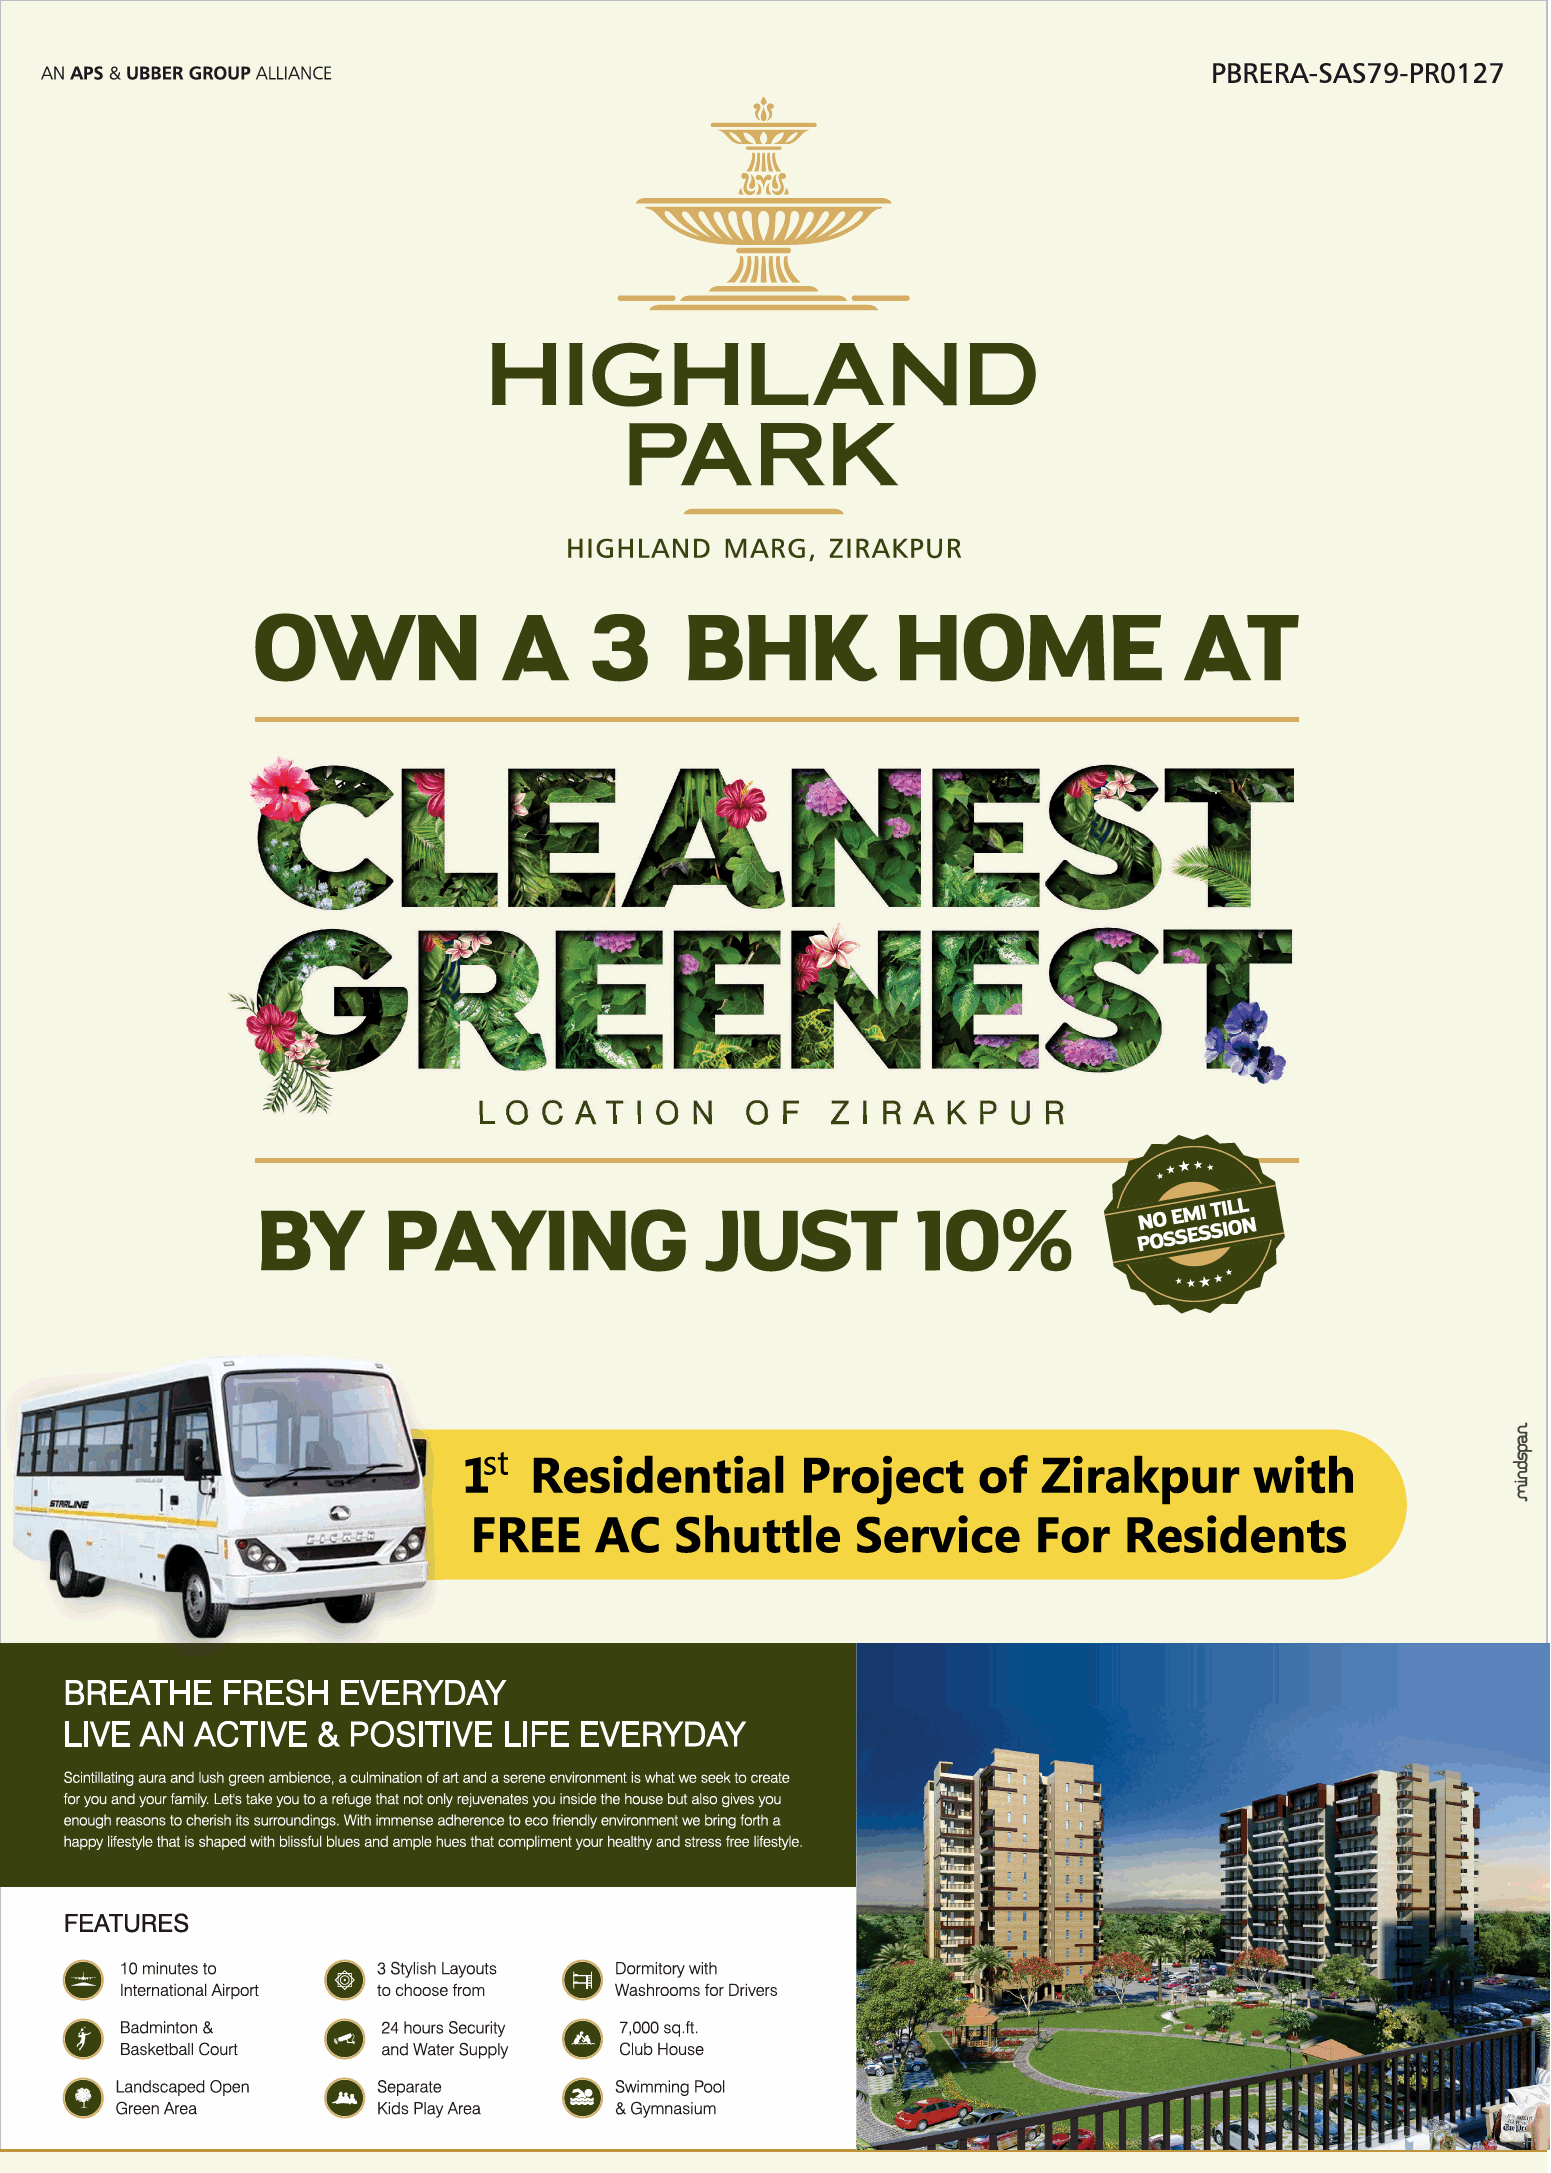 Own a 3 bhk home at cleanest greenest Highland Park in Zirakpur, Chandigarh Update